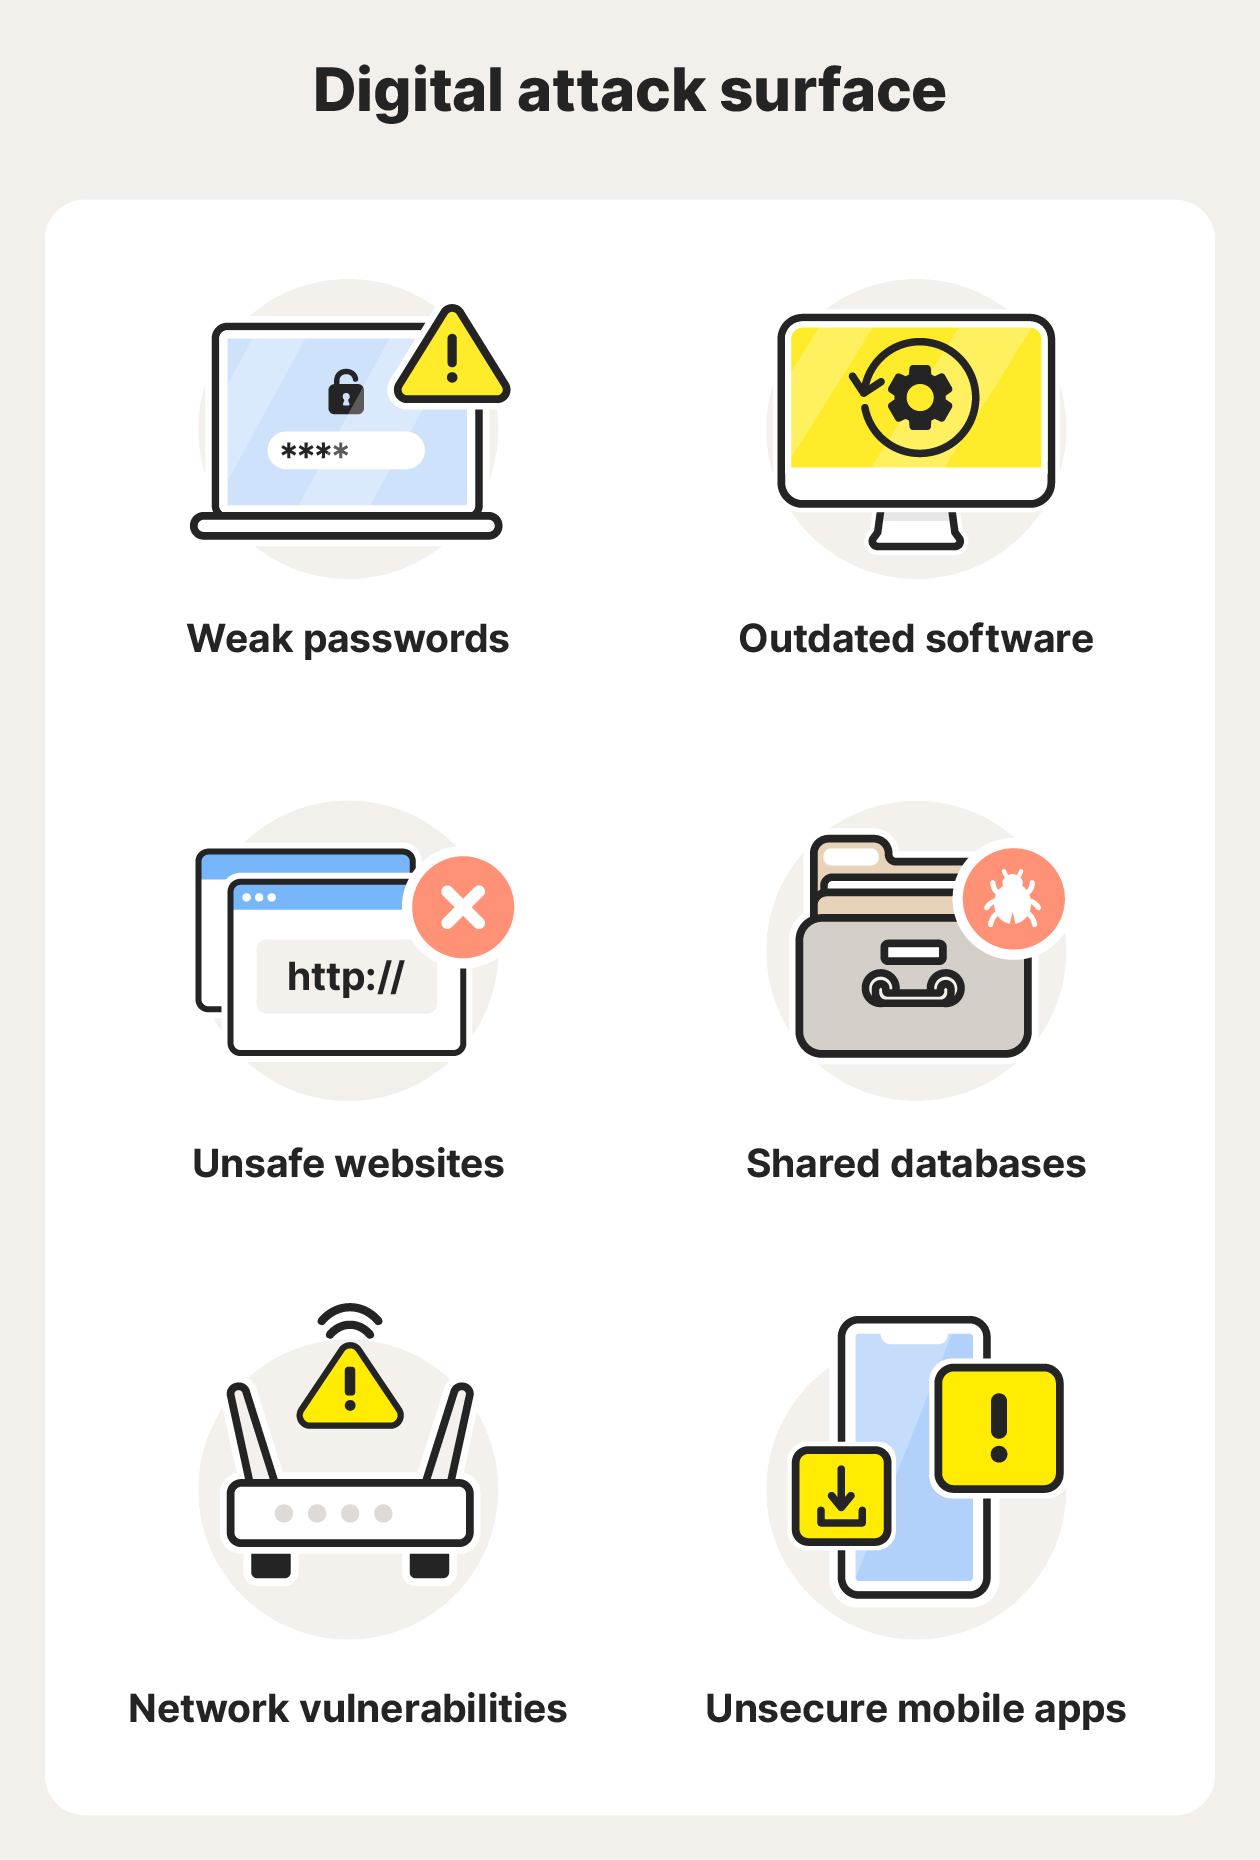 A digital attack surface can include weak passwords, outdated software, unsafe websites, shared databases, network vulnerabilities and unsecure mobile apps.